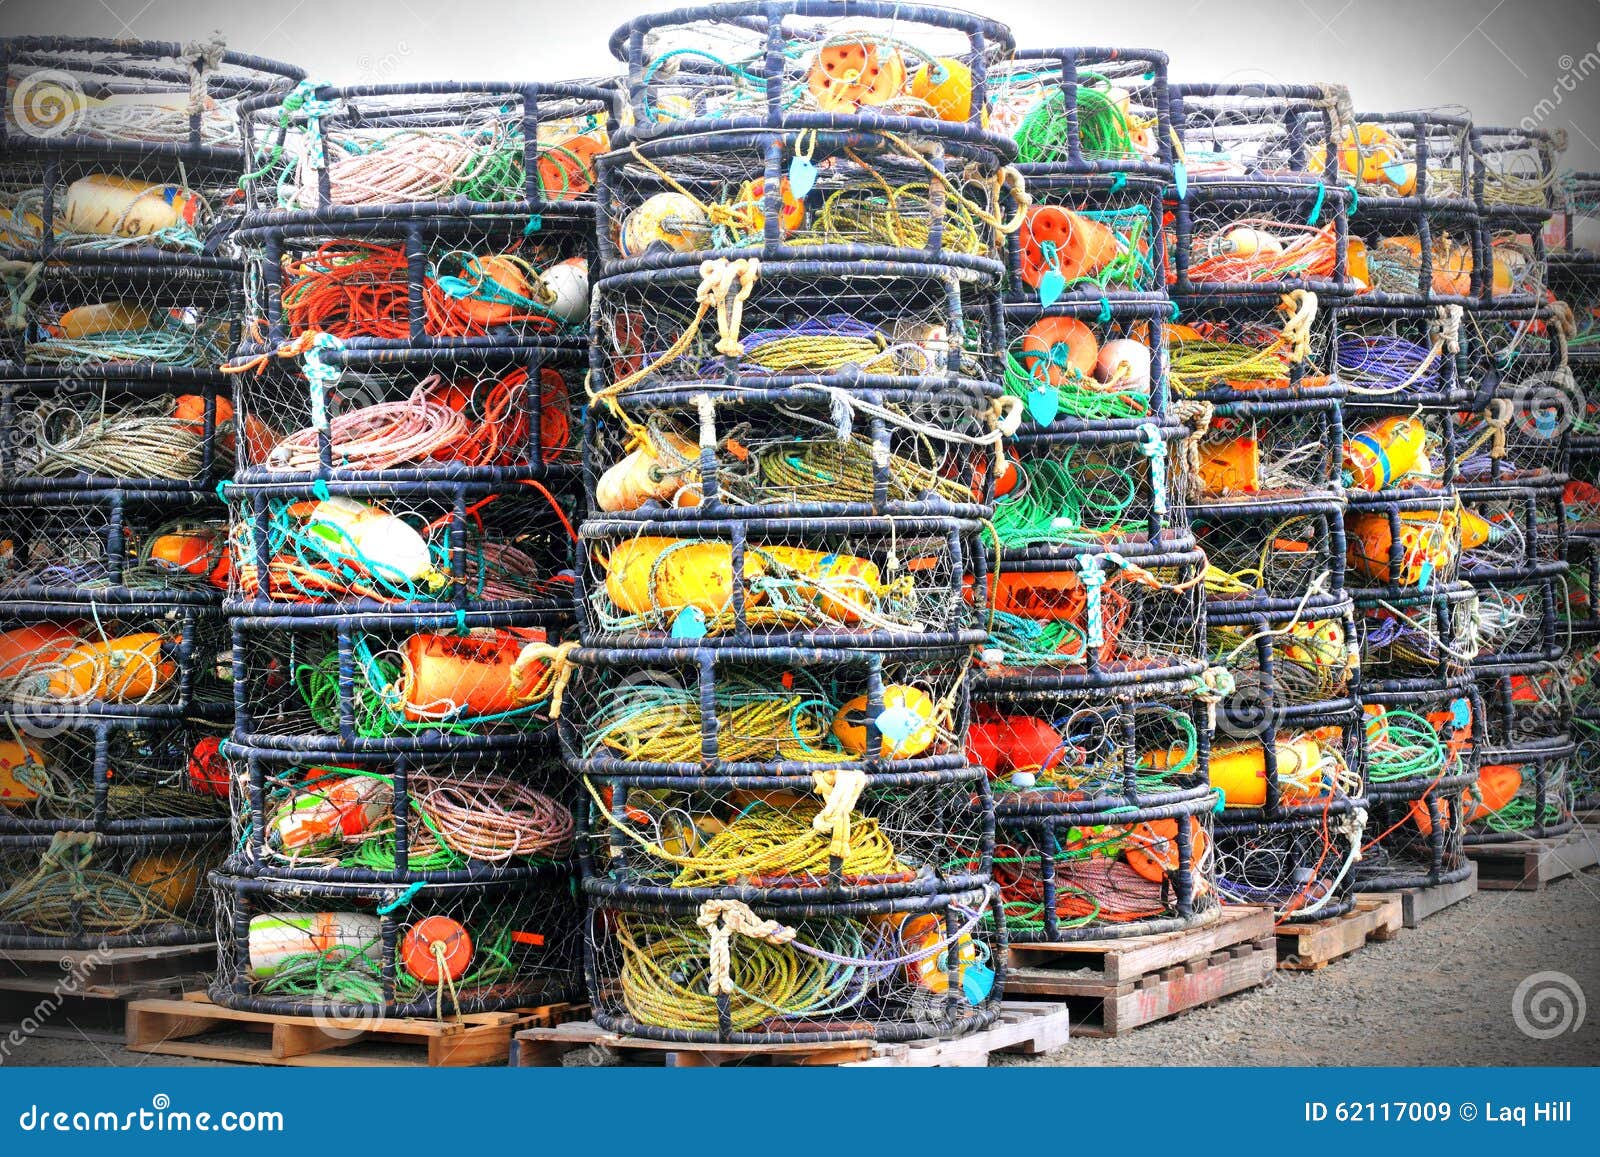 Stacked Crab Pots stock image. Image of fresh, commercial - 62117009